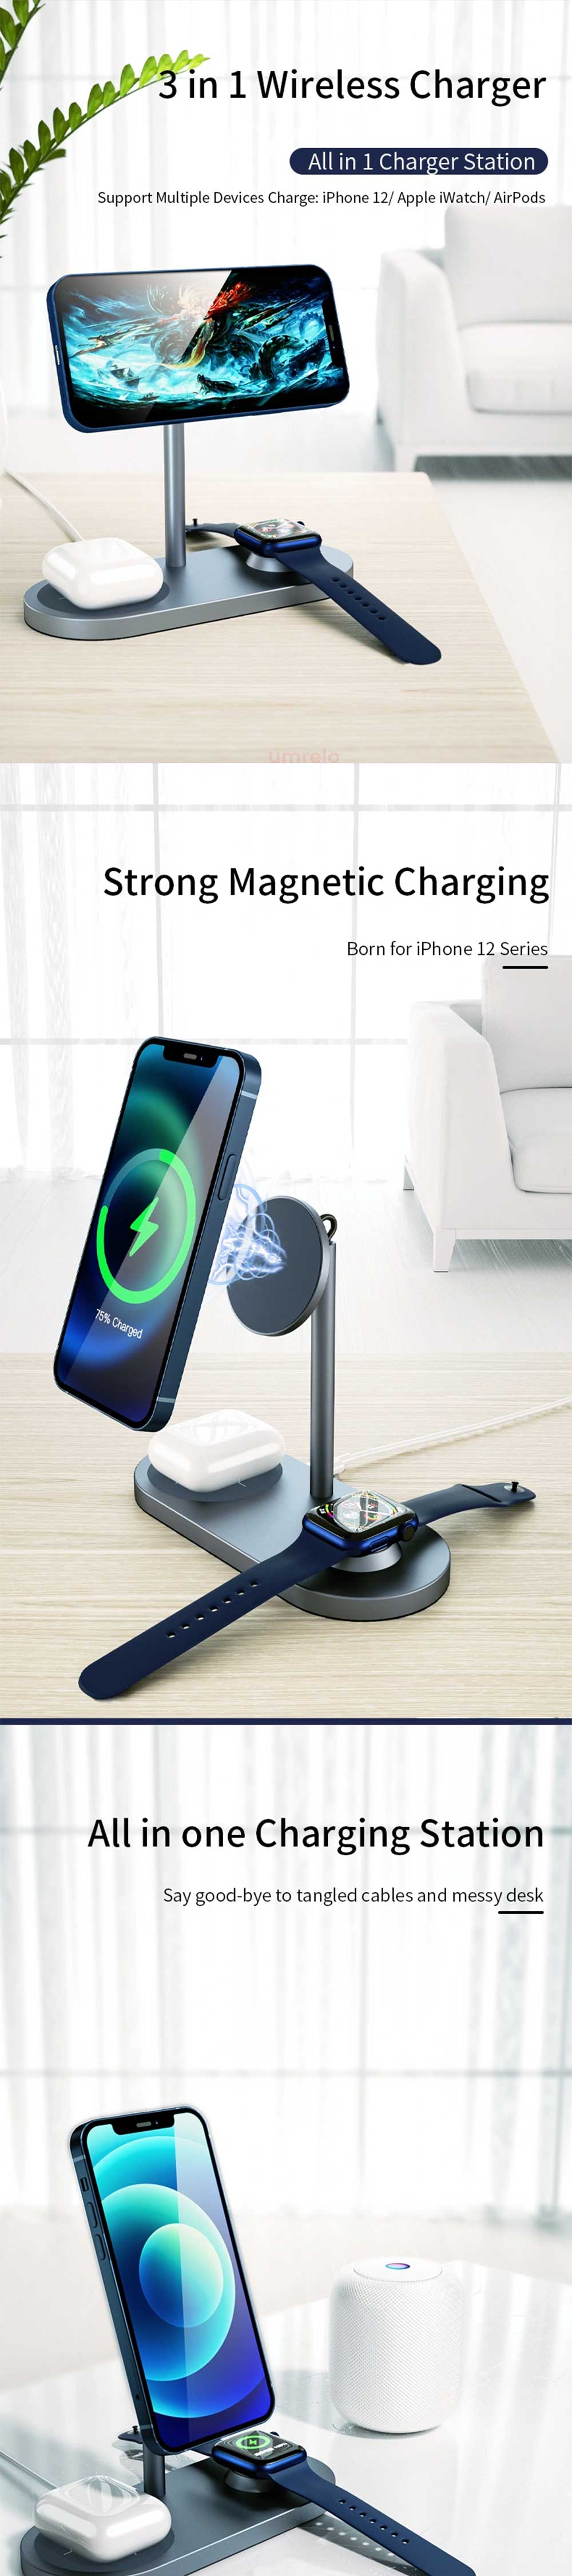 WiWU X23 Power Air 15W 3 in 1 Wireless Charger 4